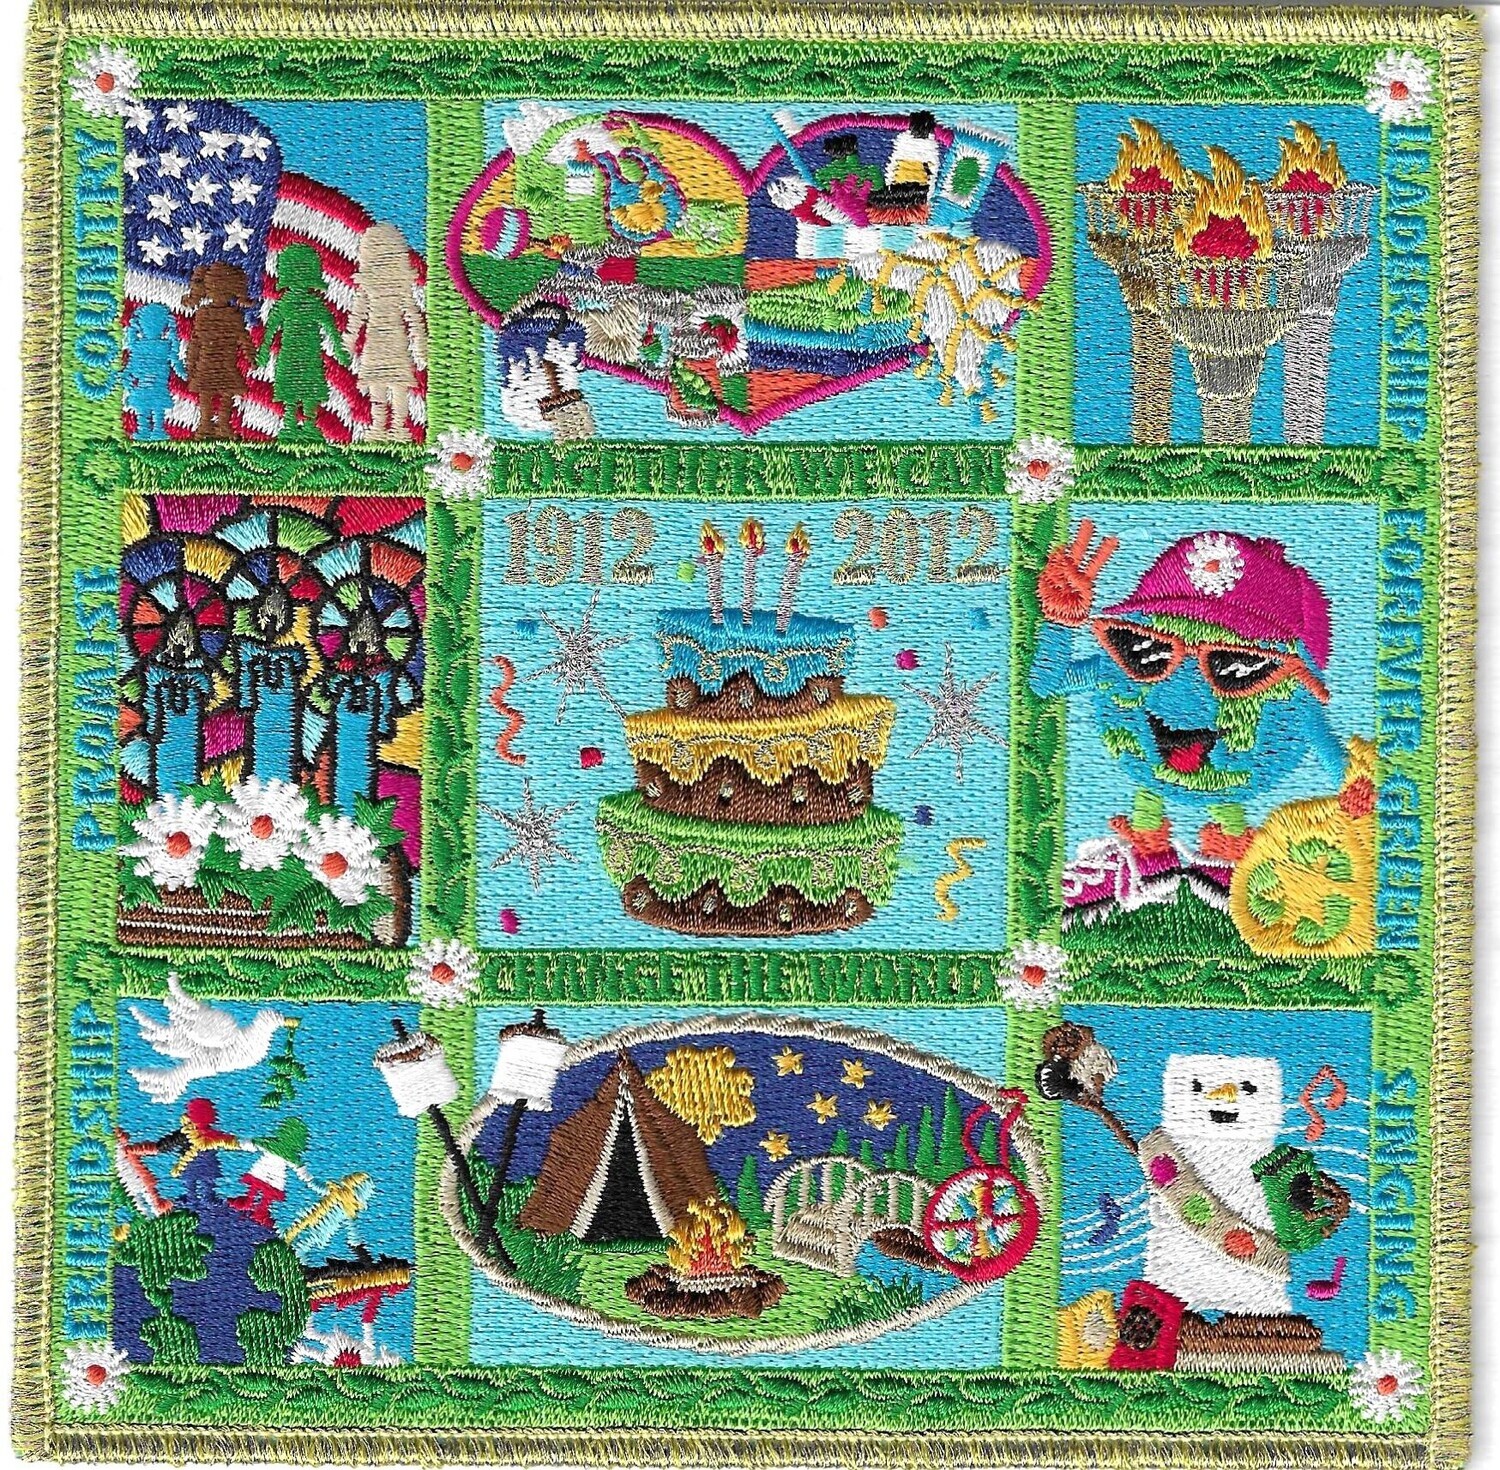 100th Anniversary Patch Quilt patch ( super large patch)